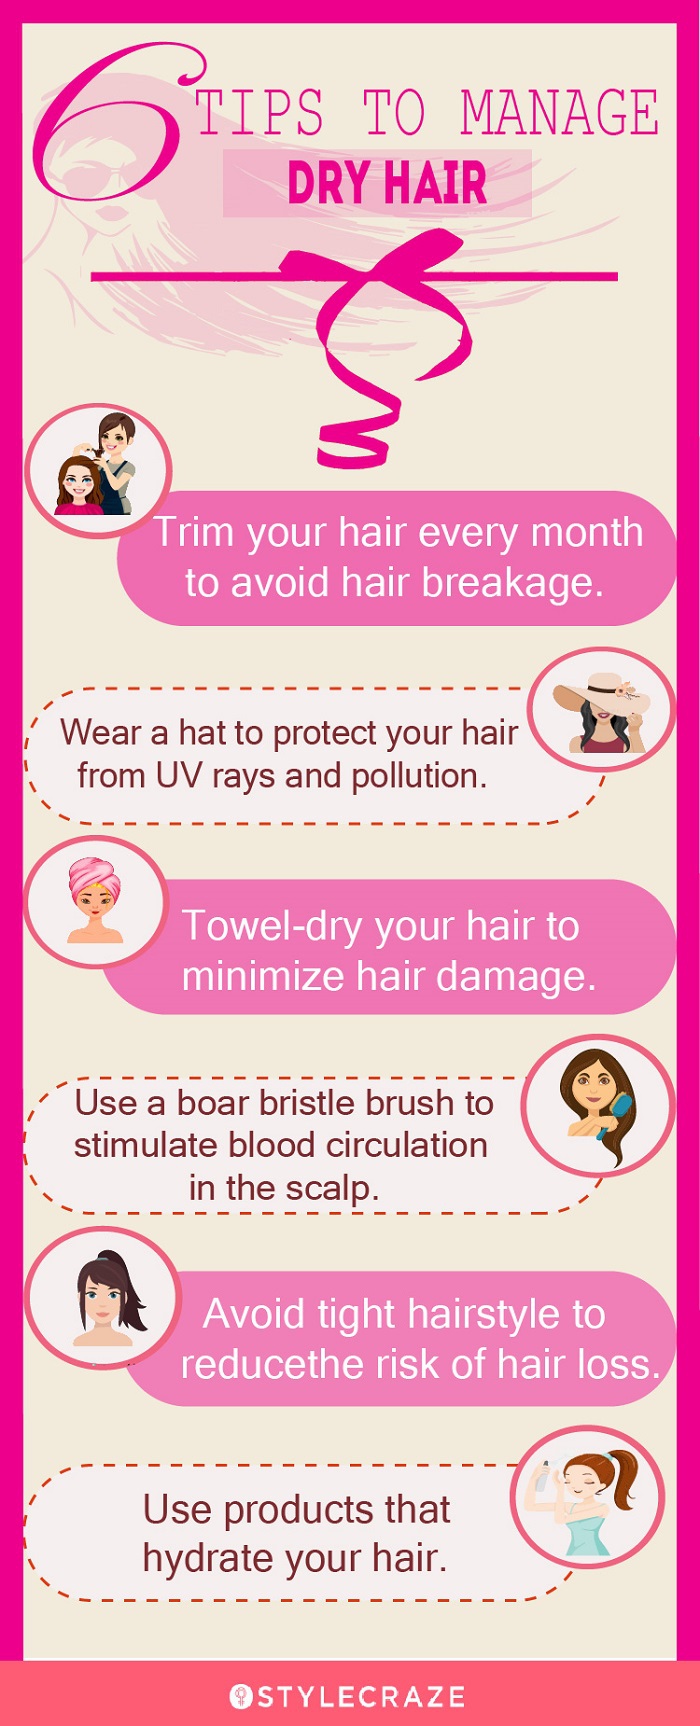 6 tips to manage dry hair (infographic)